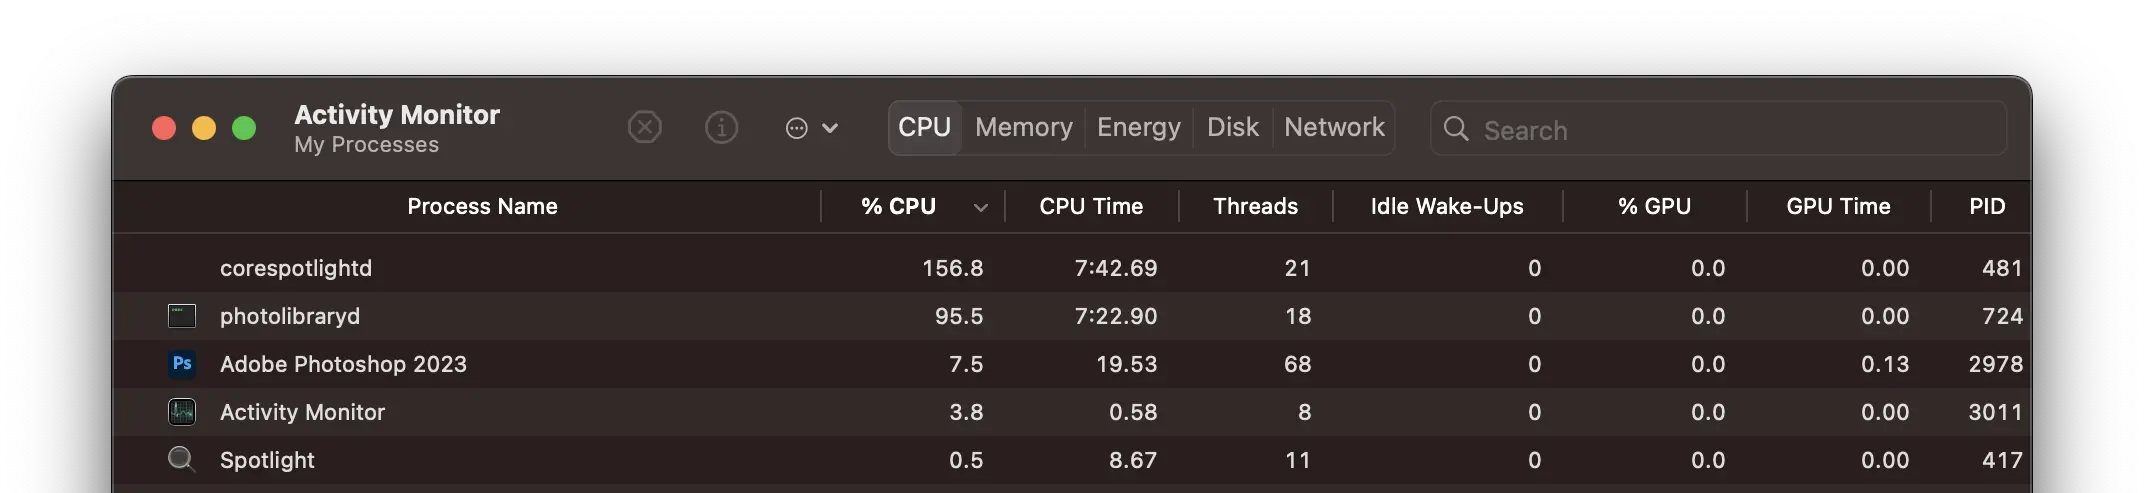 Why corespotlightd uses high resources CPU